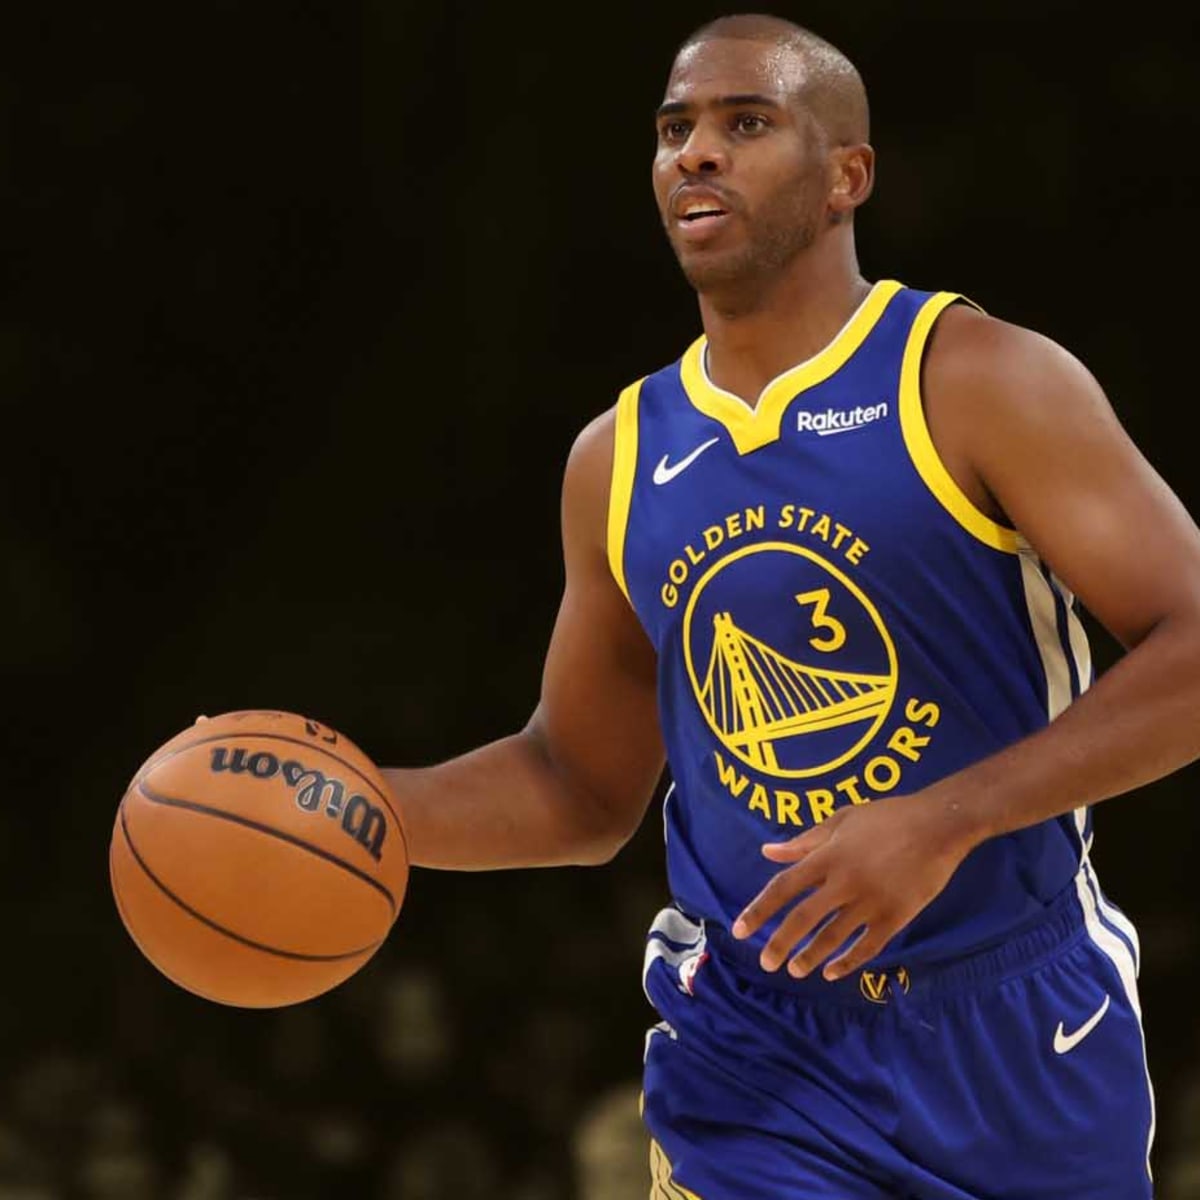 Chris Paul looks in sync with Warriors in early preseason win over Lakers